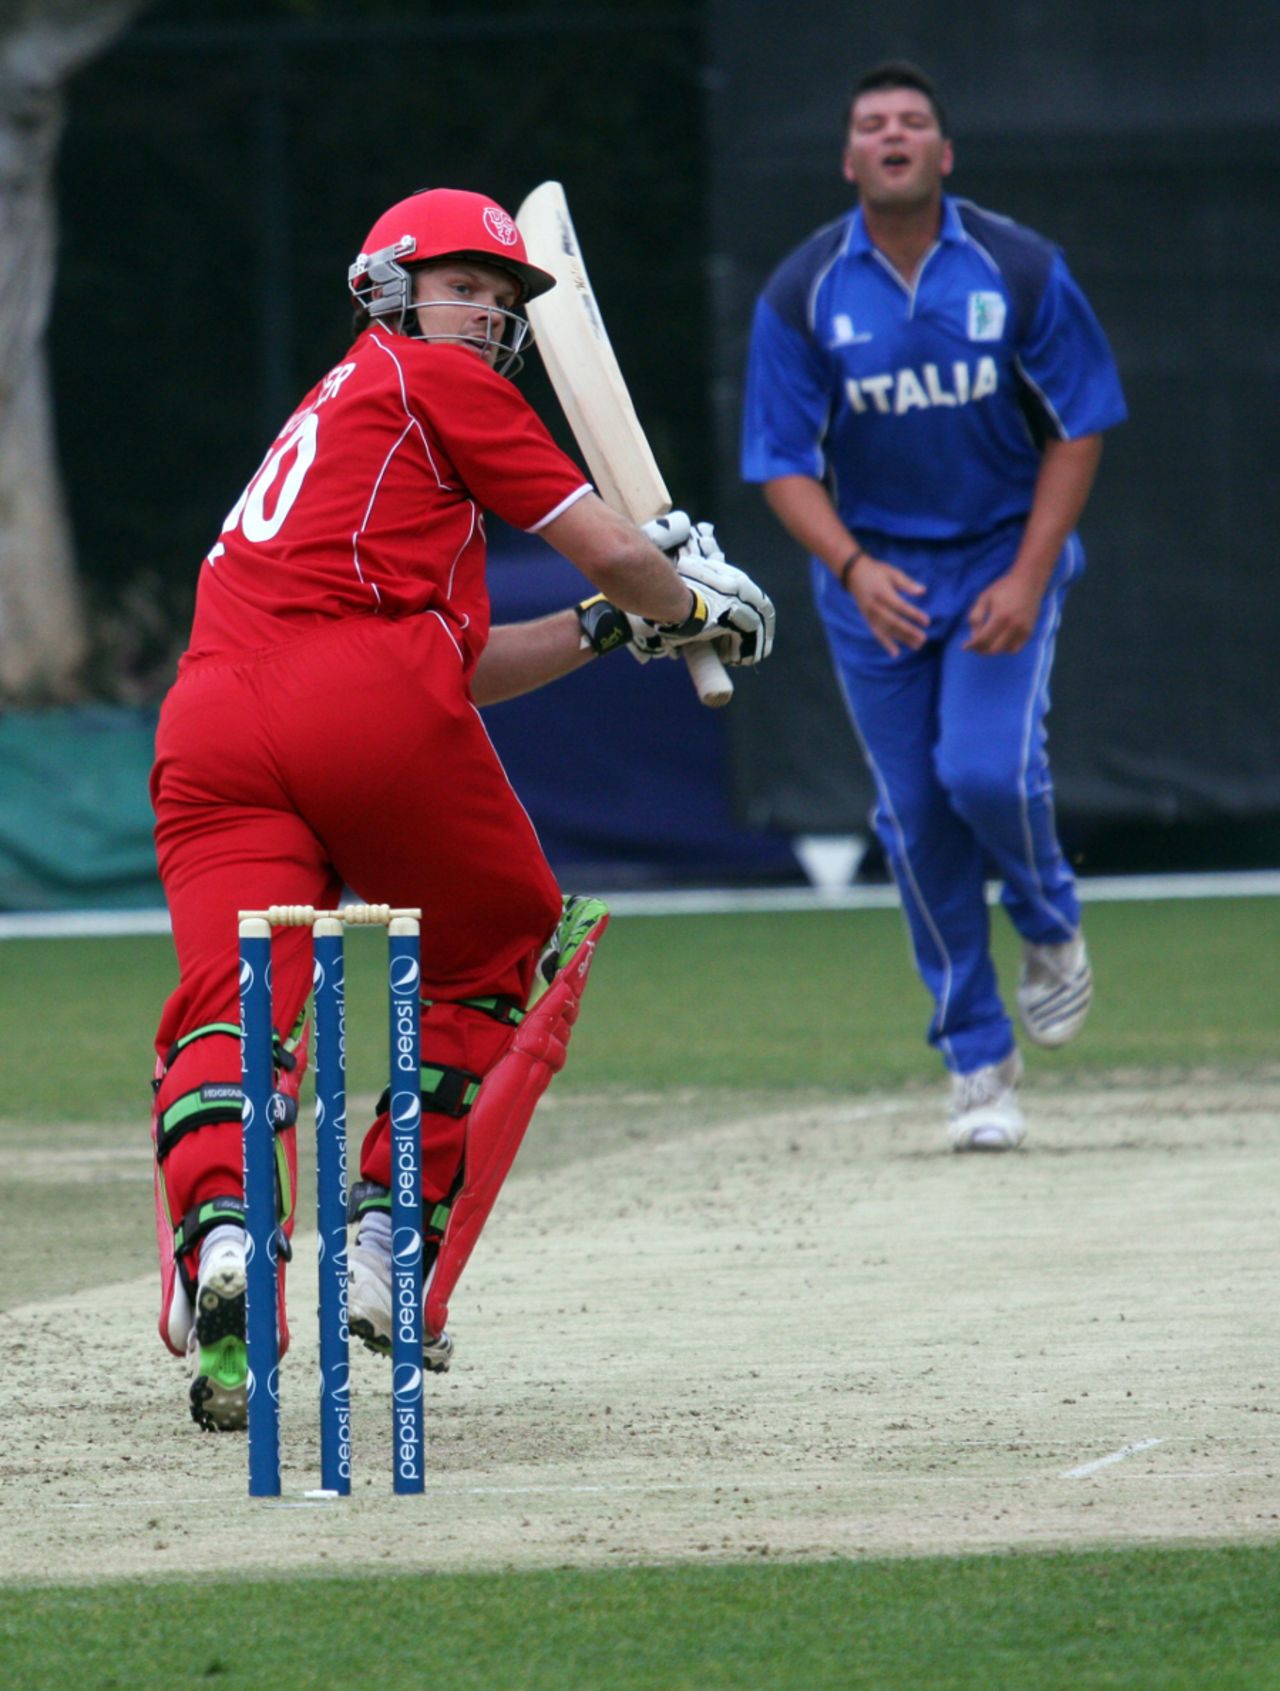 Freddie Klokker flicks to the boundary on his way to 39, Denmark v Italy, WCL Division Three, Hong Kong Cricket Club, January 22, 2011